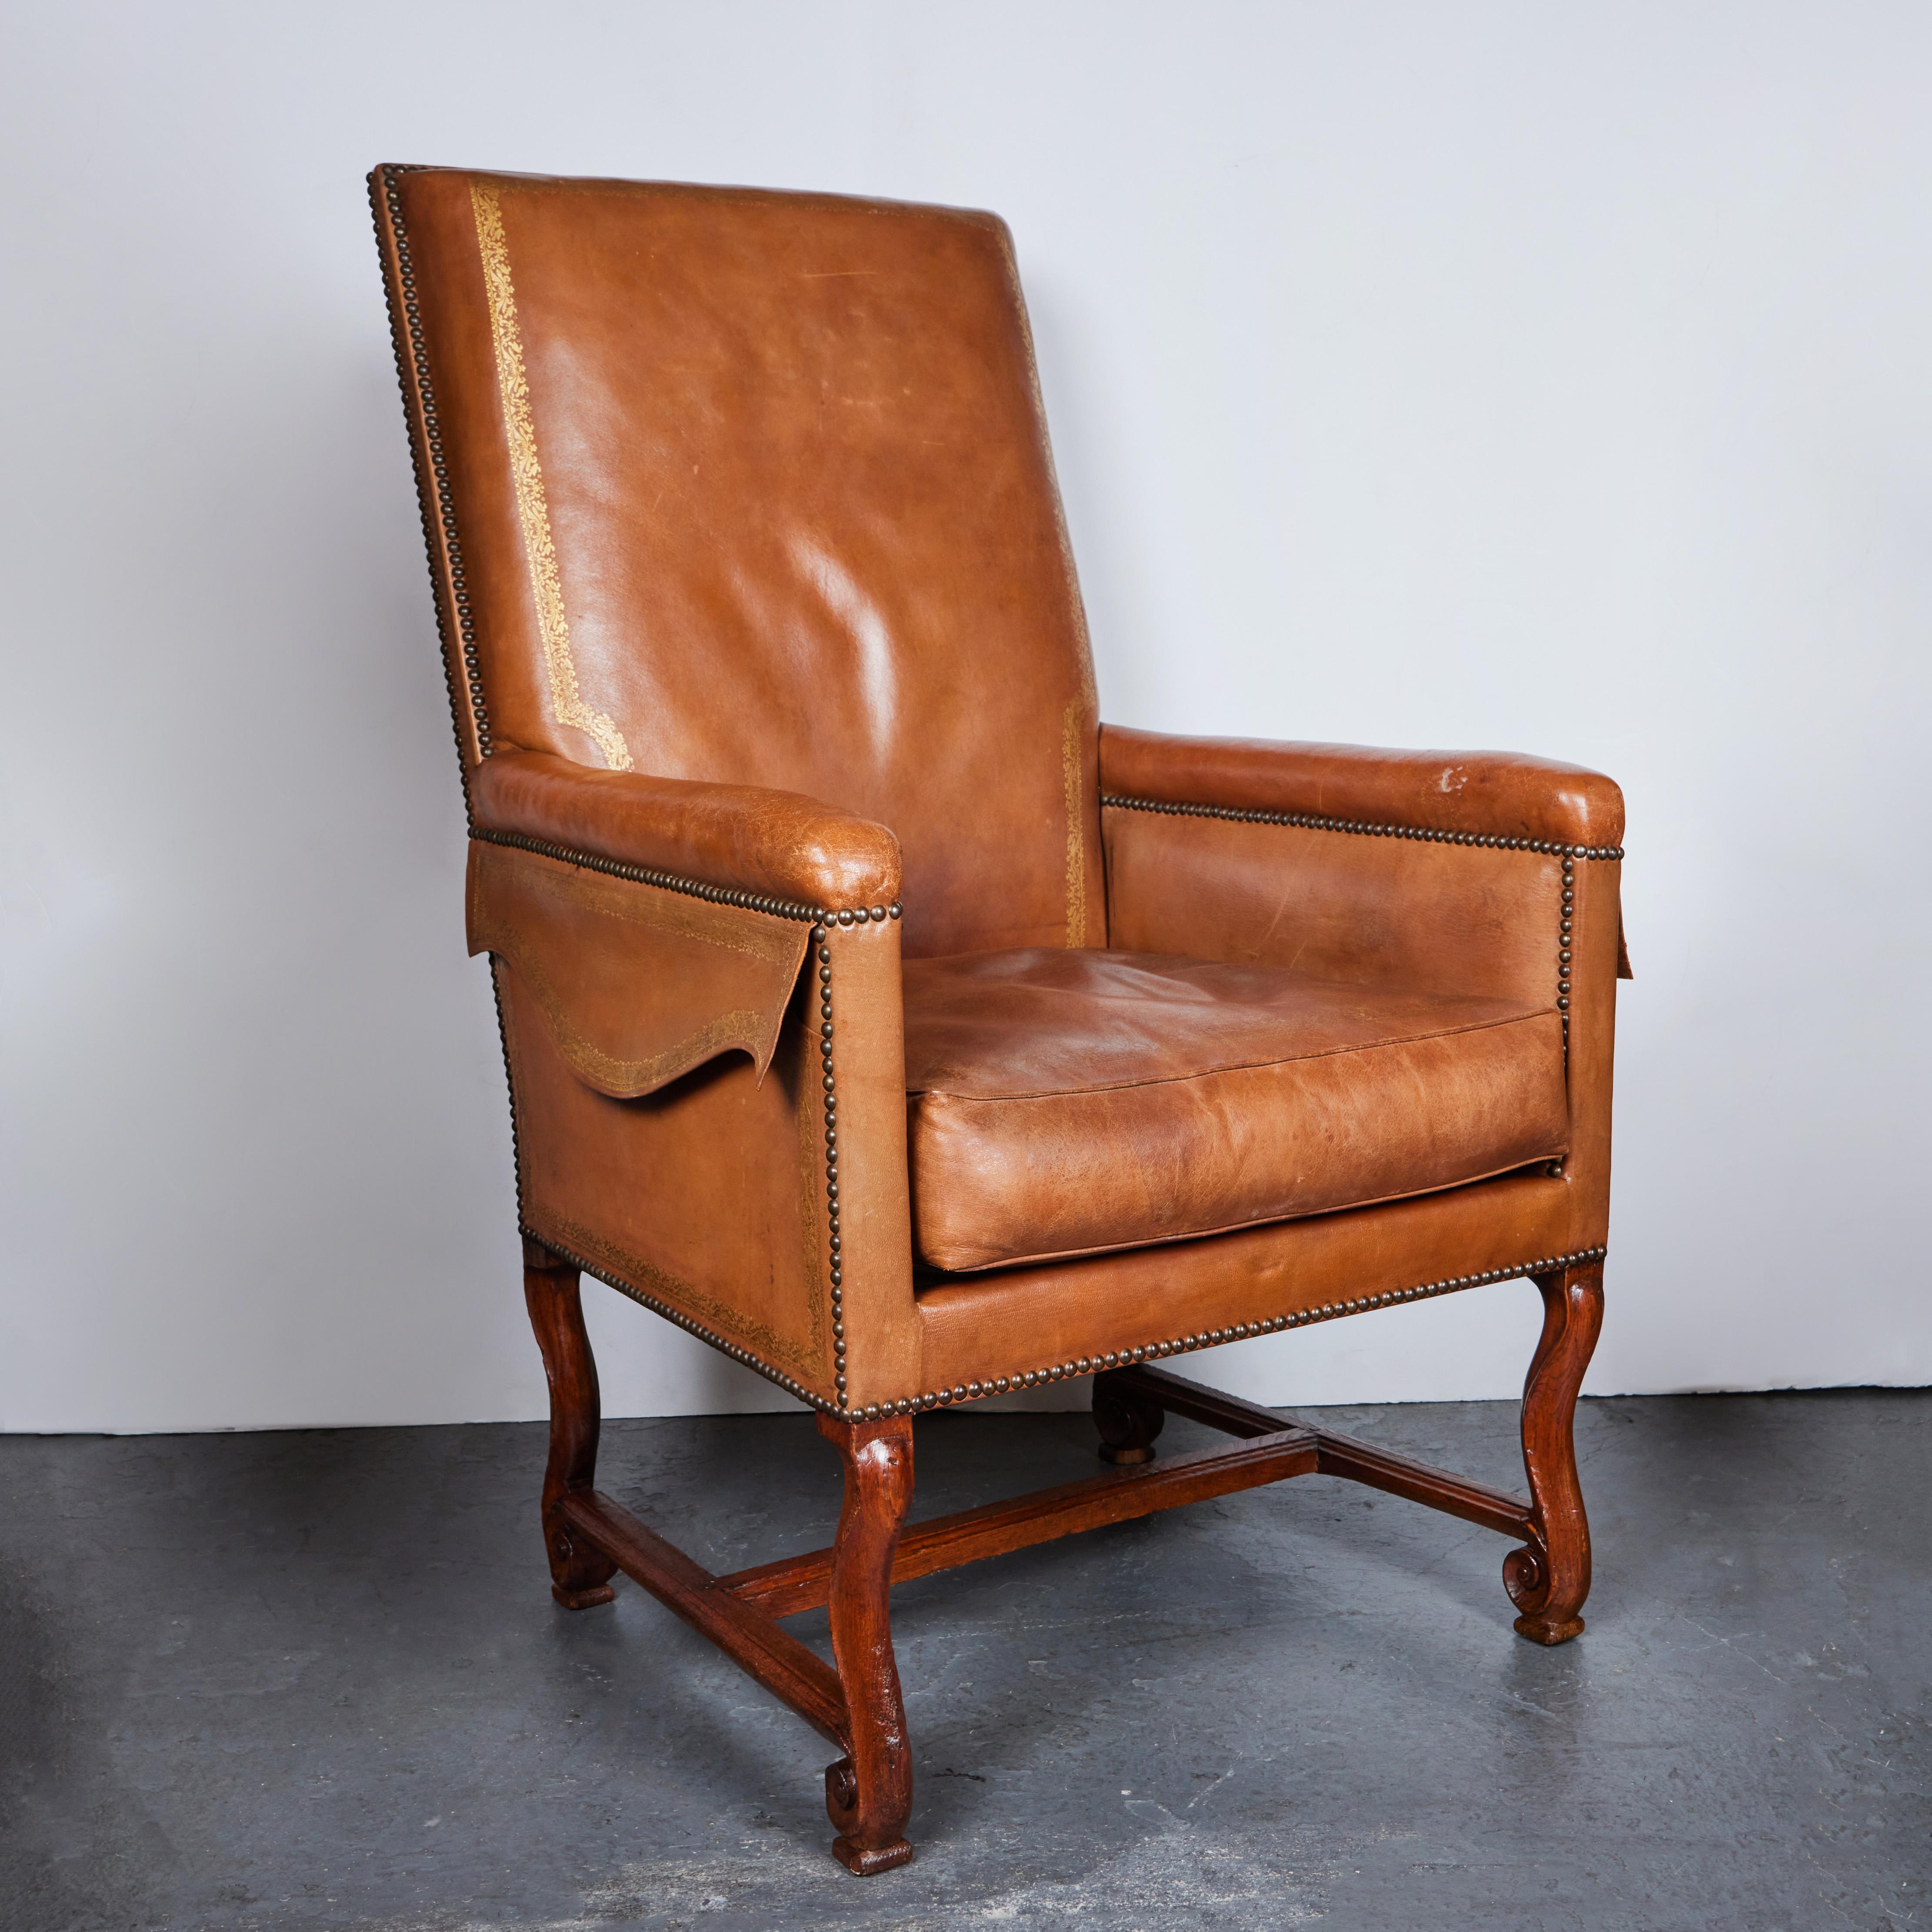 Italian Antique Walnut and Leather Armchair